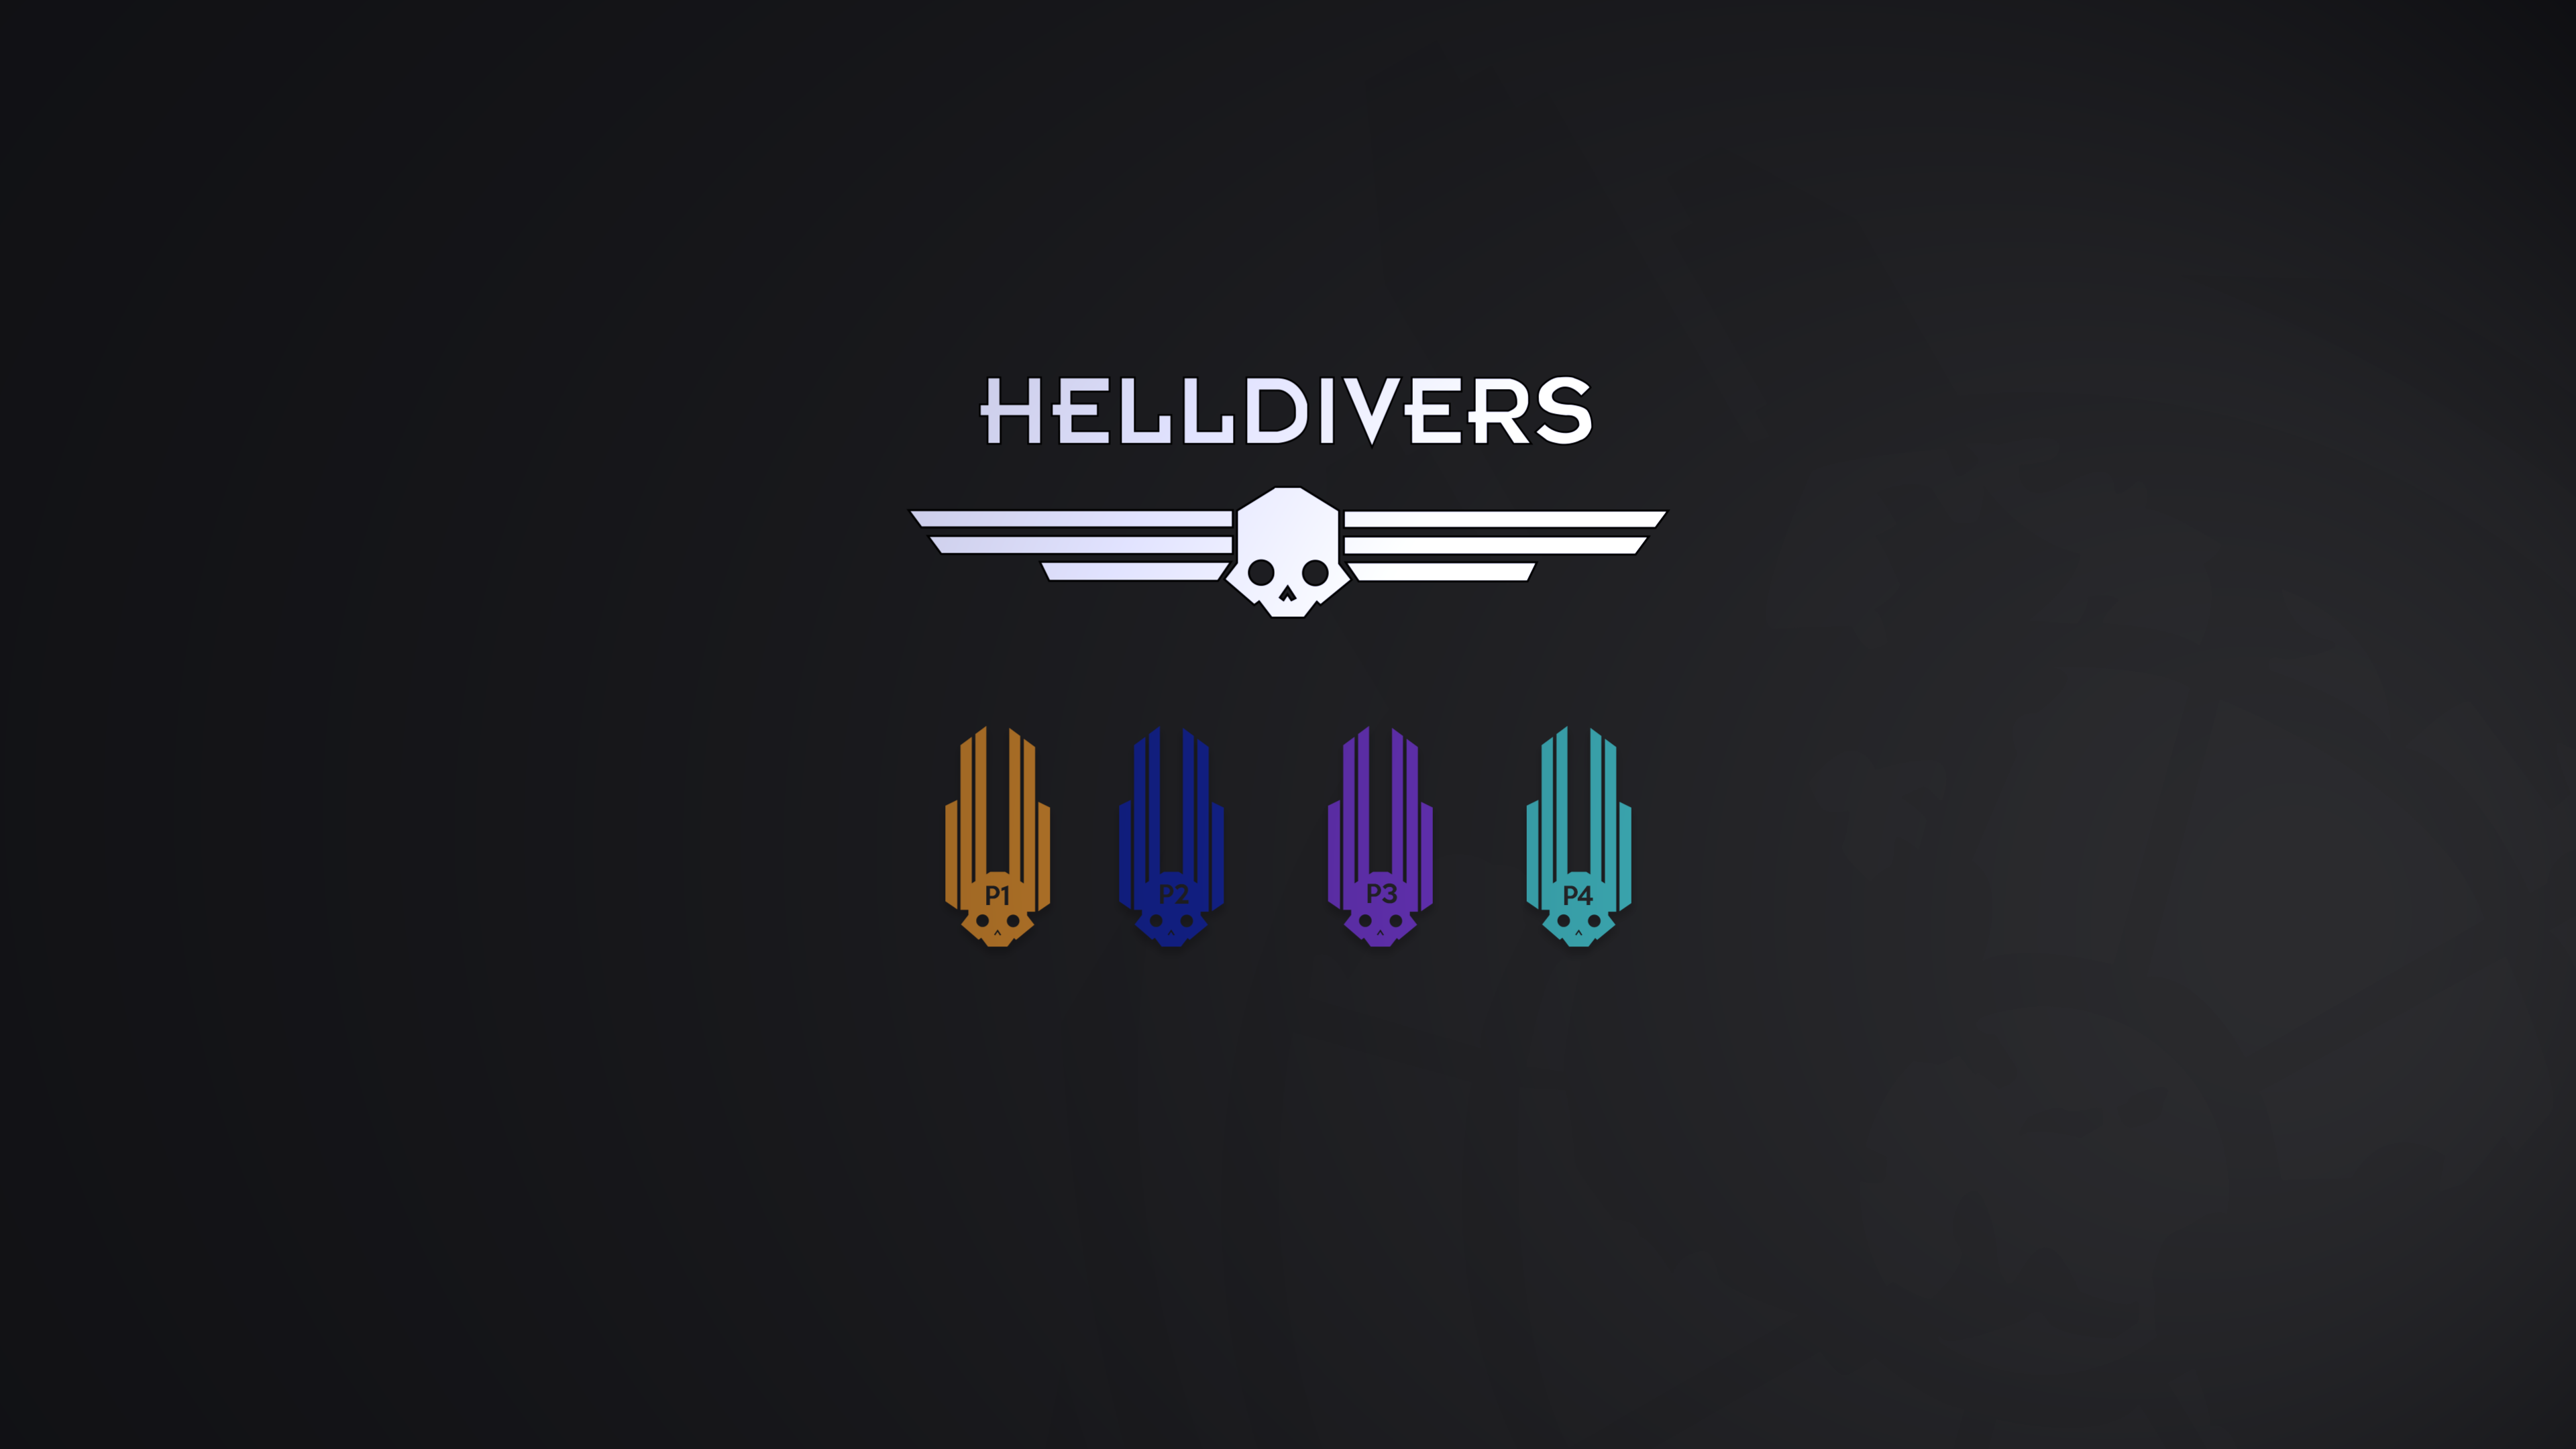 is there going to be a helldivers 2